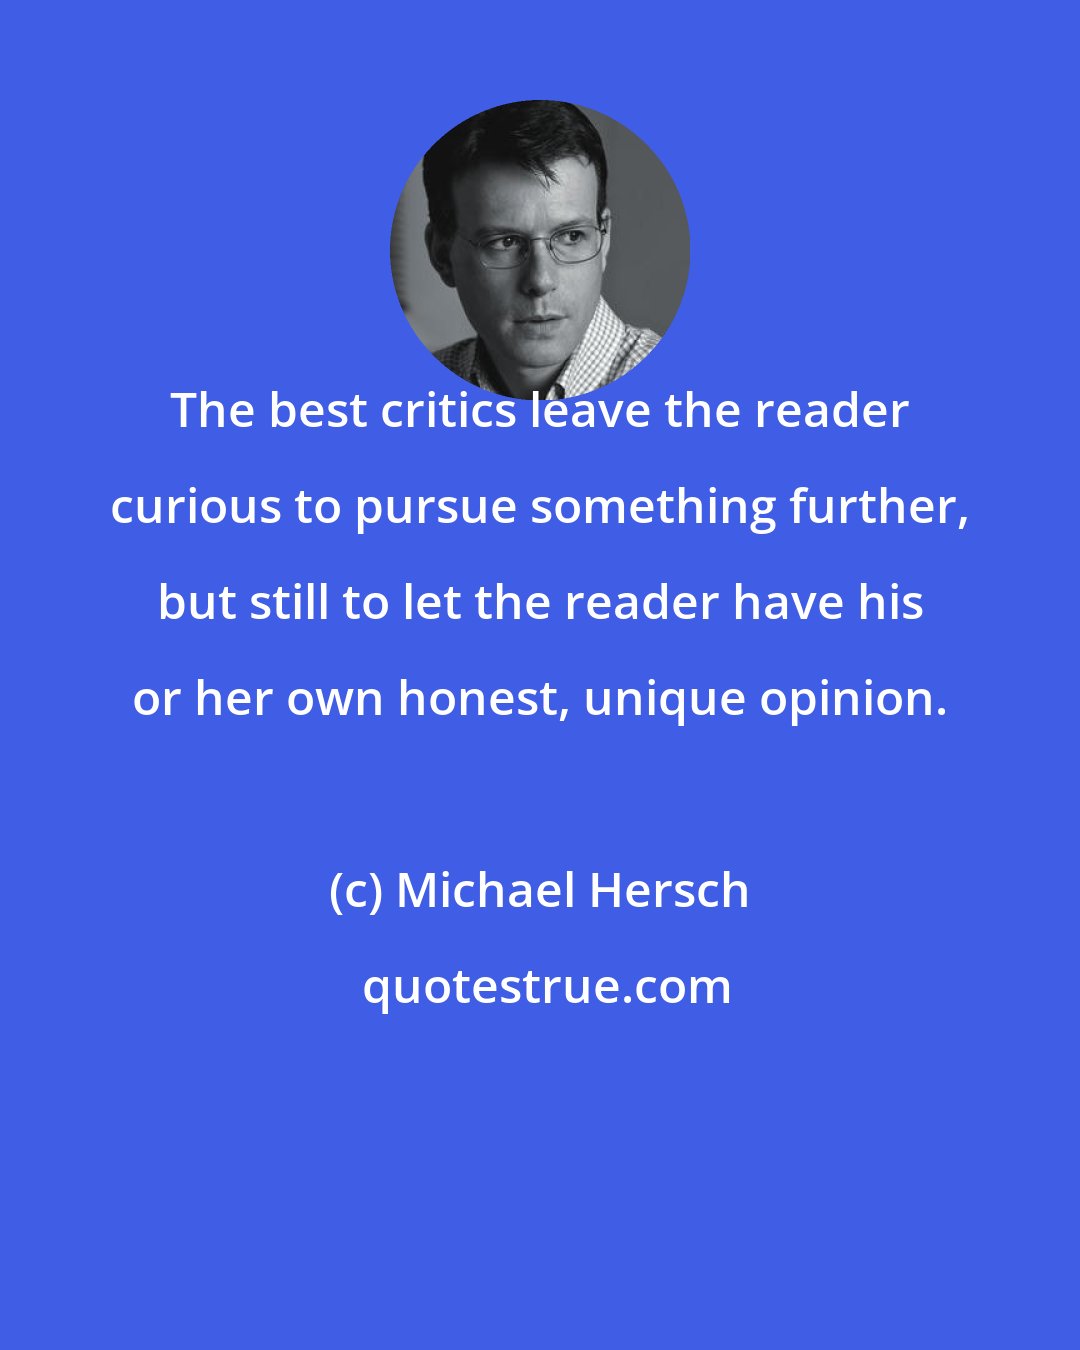 Michael Hersch: The best critics leave the reader curious to pursue something further, but still to let the reader have his or her own honest, unique opinion.